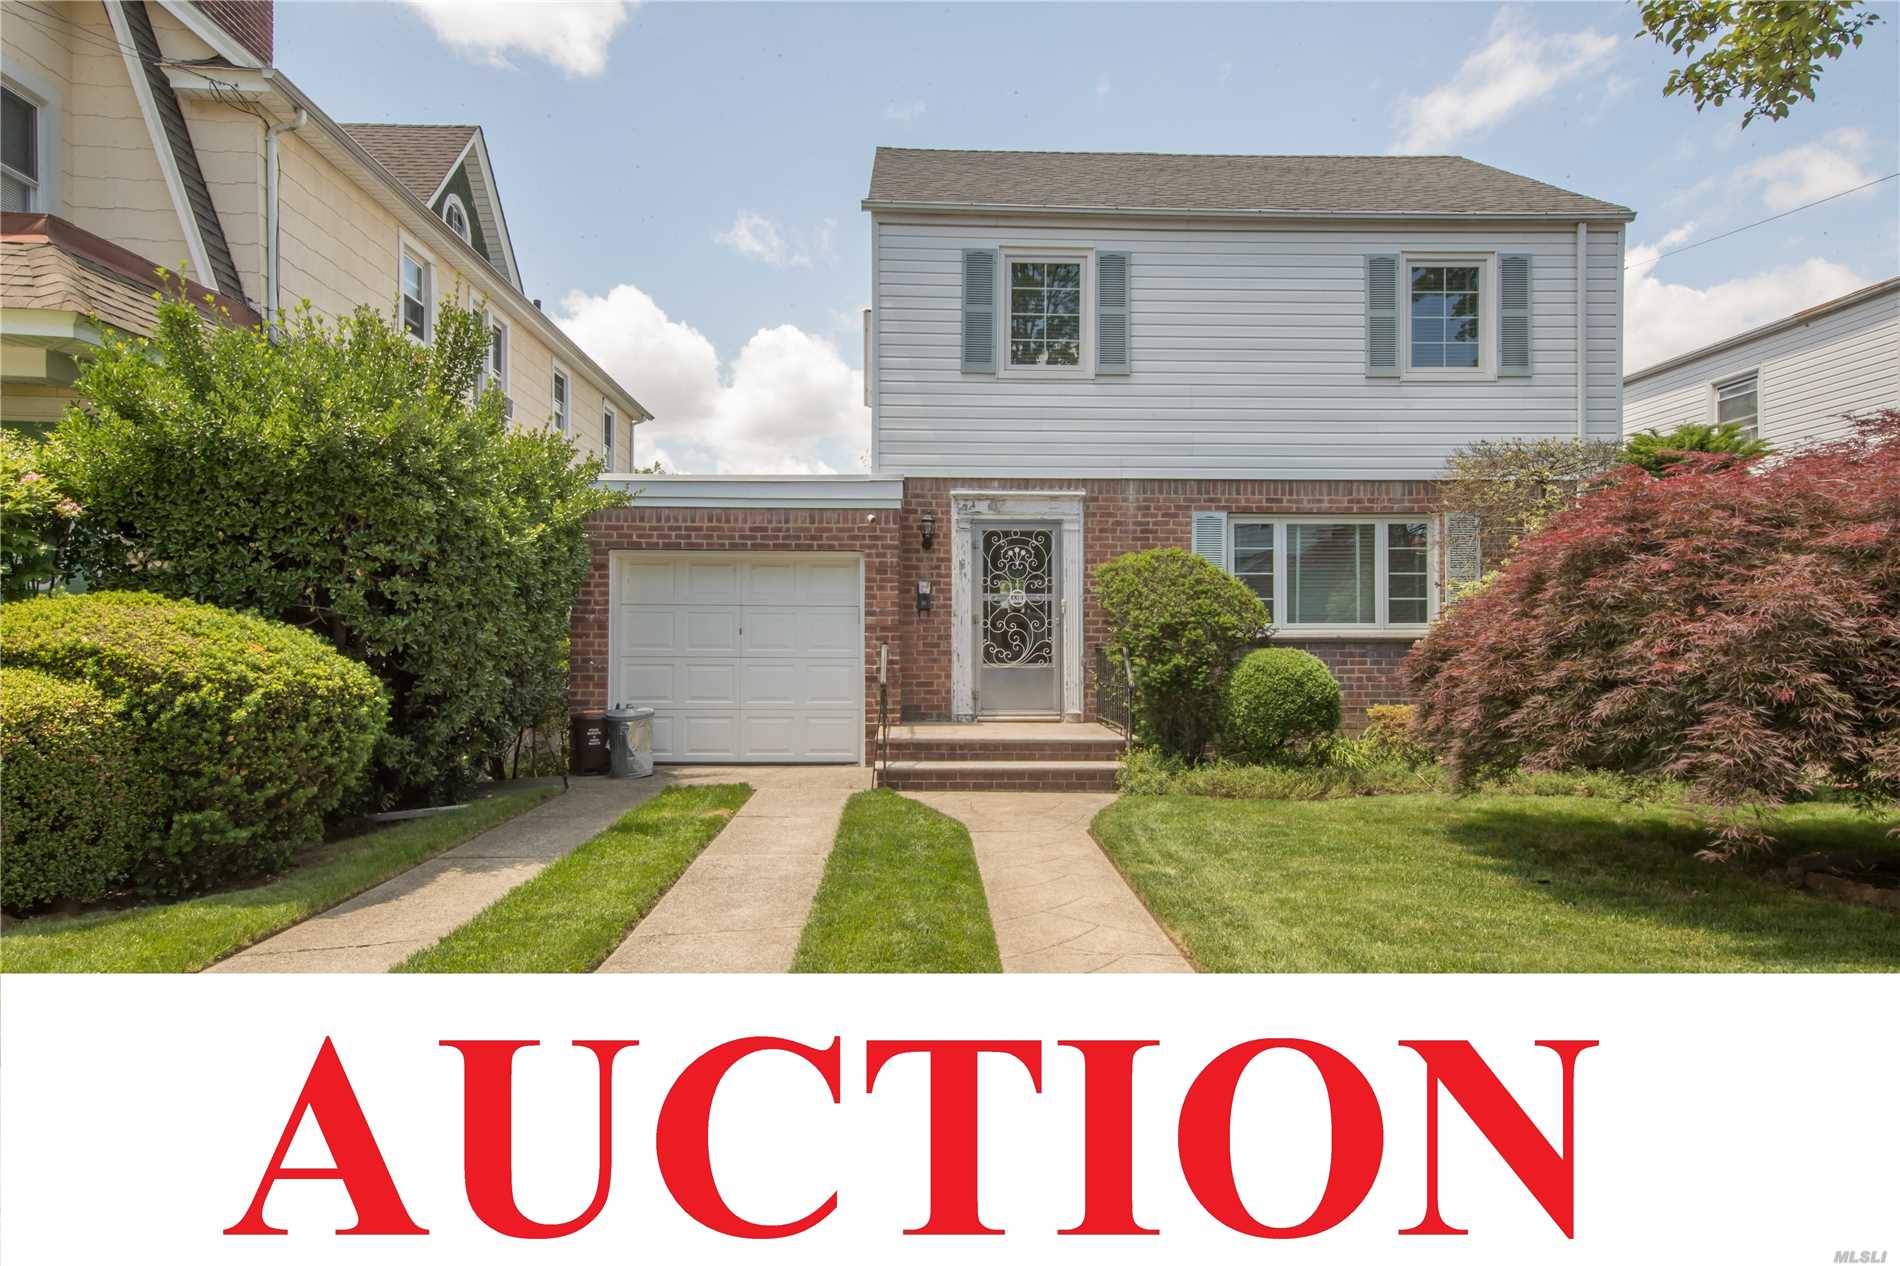 Trustee Directed Public Auction: This Property Will Be Sold At Public Auction On July 18, 2018.